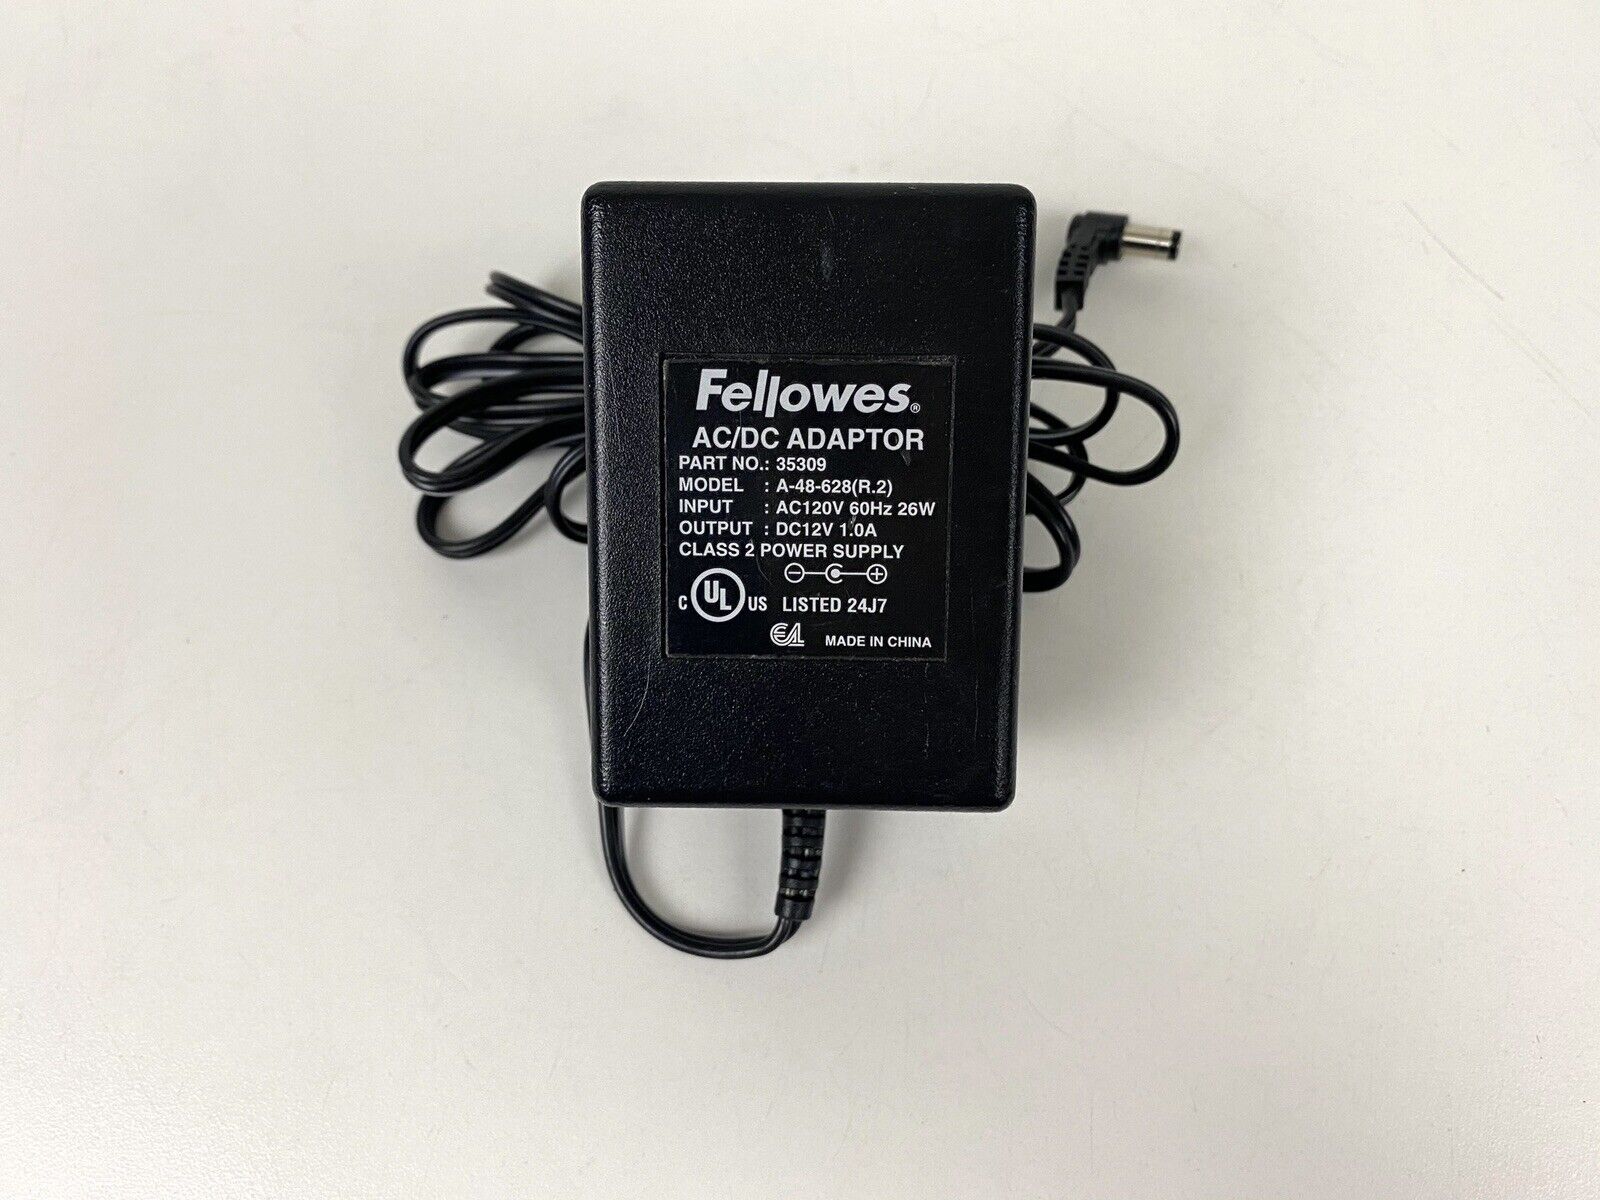 *Brand NEW* A-48-628 r.2 Fellowes Paper Cutter AC/DC adapter 35309 Power Supply - Click Image to Close